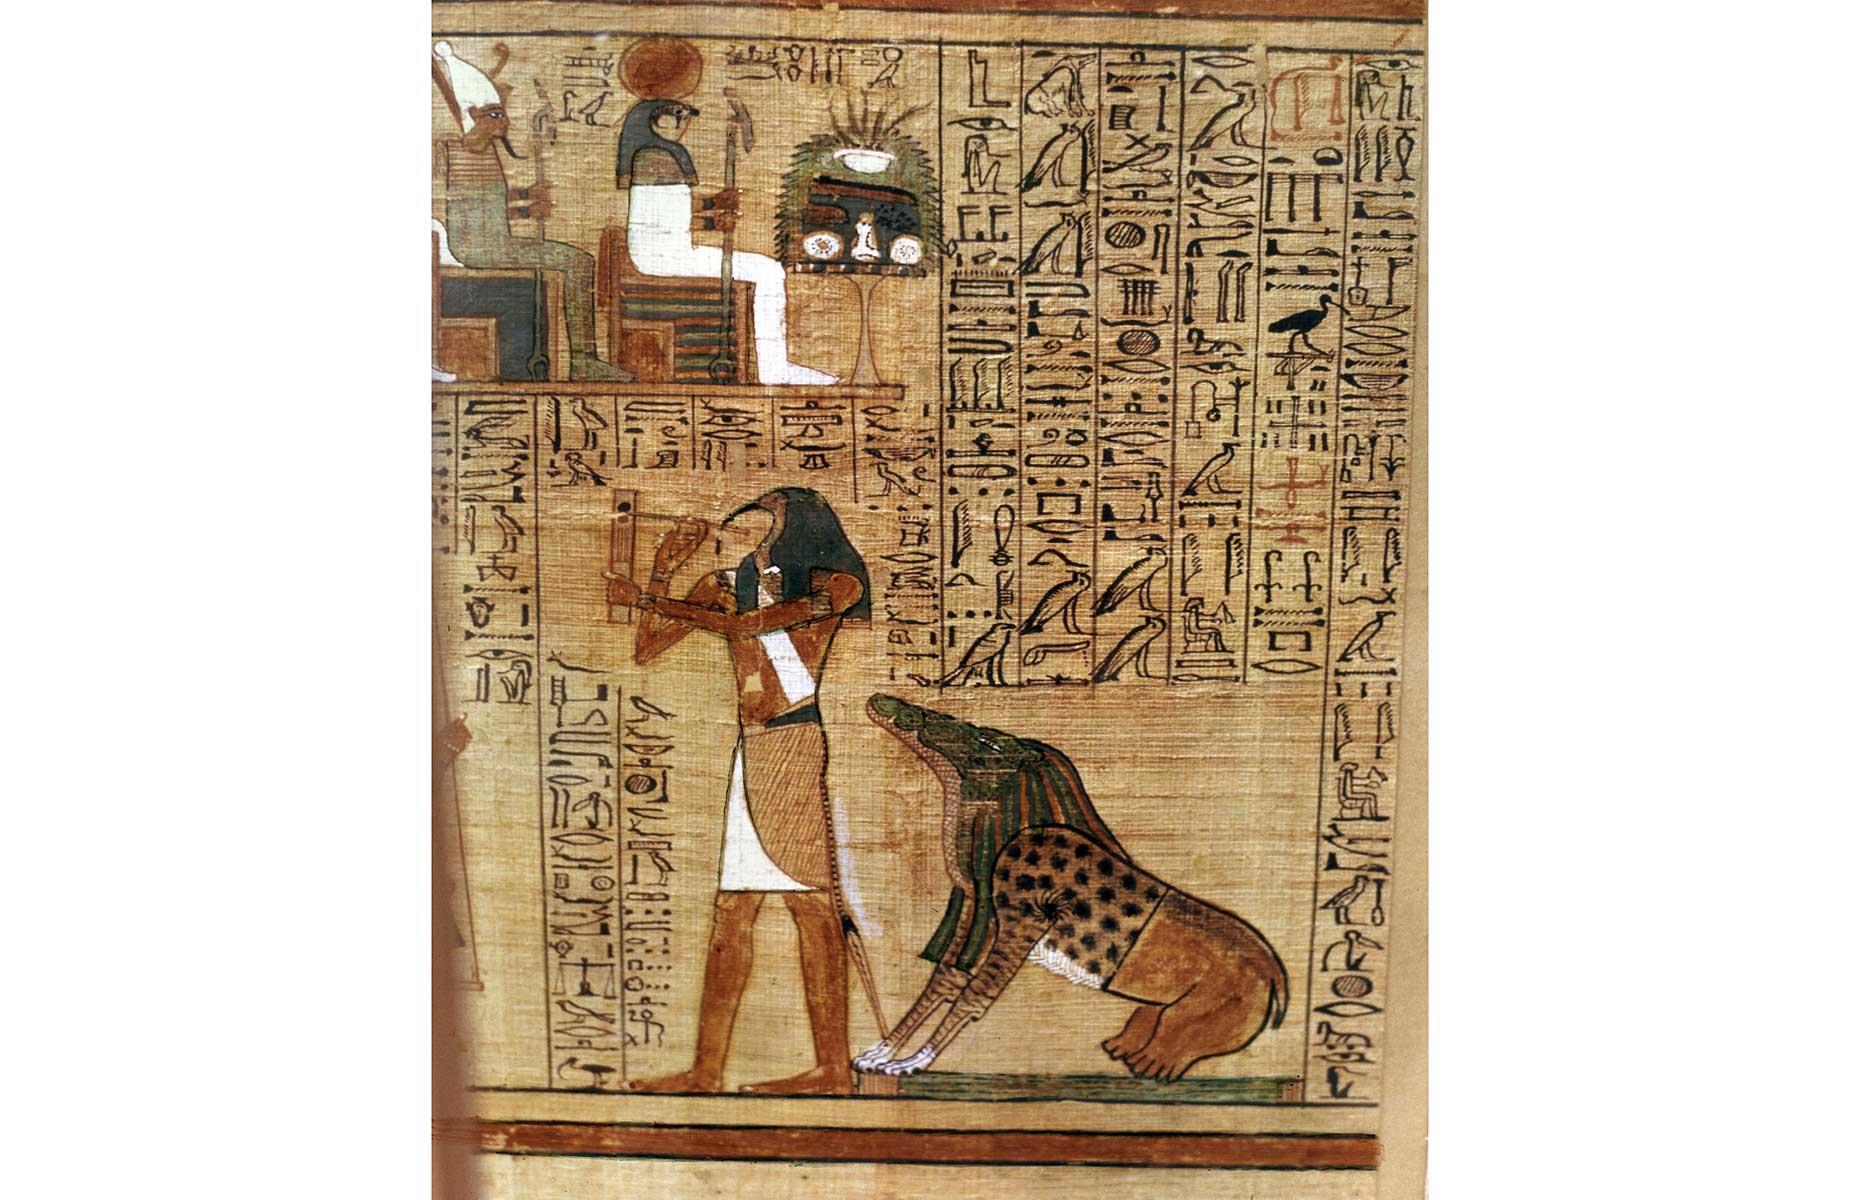 <p>The Book of the Dead is an umbrella term for a series of ancient Egyptian texts. Specific chants (or 'utterances') were typically copied onto papyrus scrolls and placed in tombs, like the fragment from the tomb of Theban scribe Ani in Luxor pictured here, which dates back to 1250 BC and is on display at the British Museum. This scene depicts the Hall of Judgement, with Ani muttering Spell 30B as his heart is weighed on the scales of justice, determining whether he'd make it to paradise or not. Spells from the Book of the Dead also adorned mummy bandages and even Tutankhamun's golden death mask.</p>